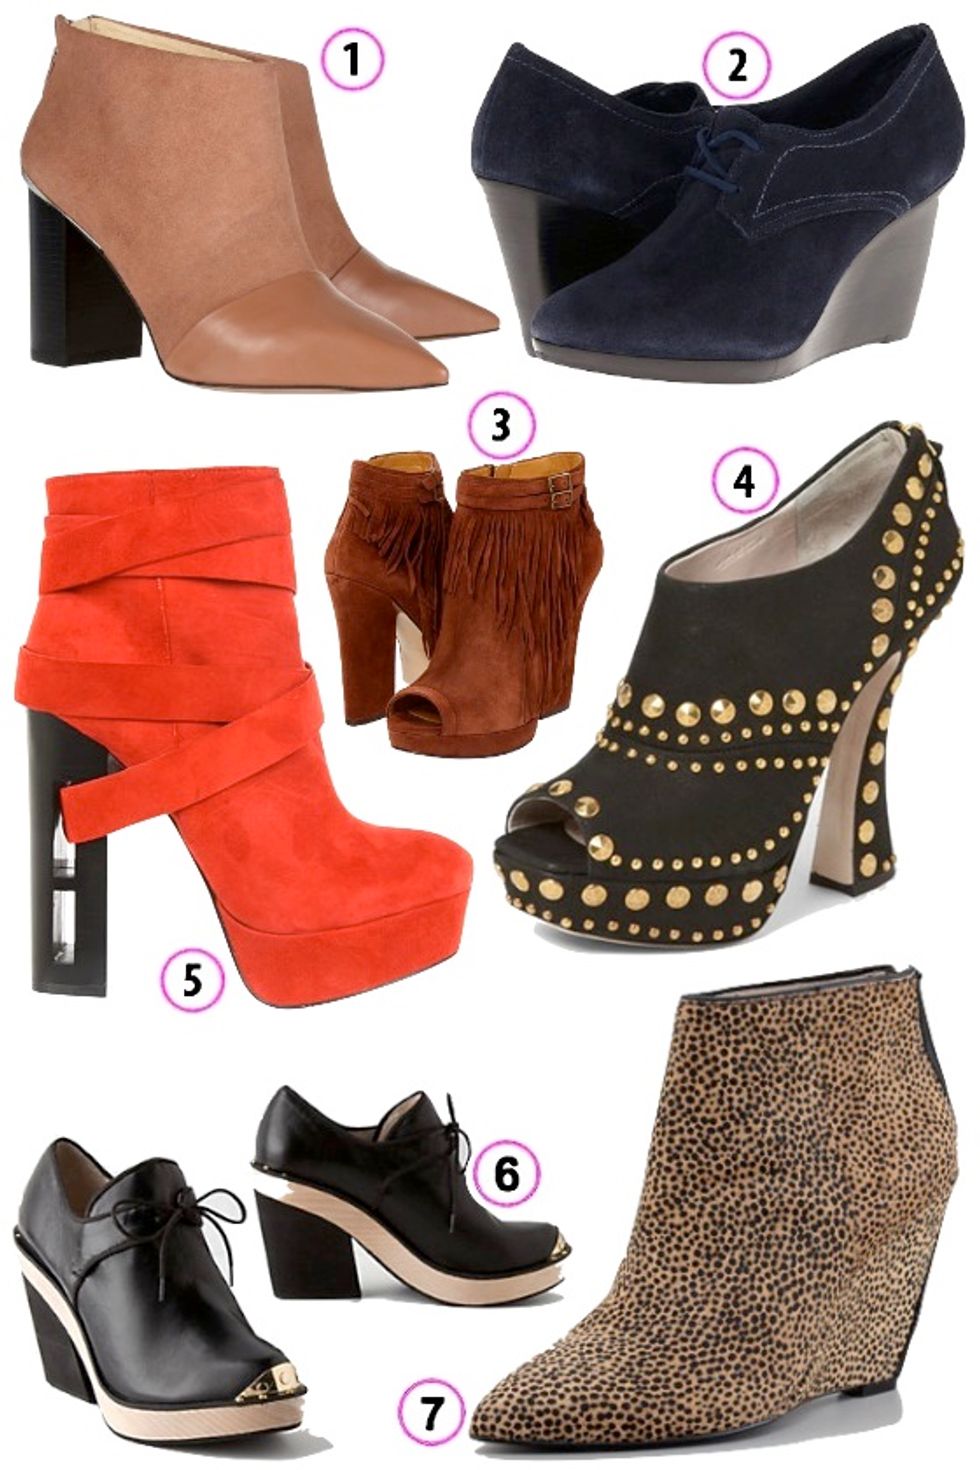 Look of the Week: Funky-Fresh Booties for Fall